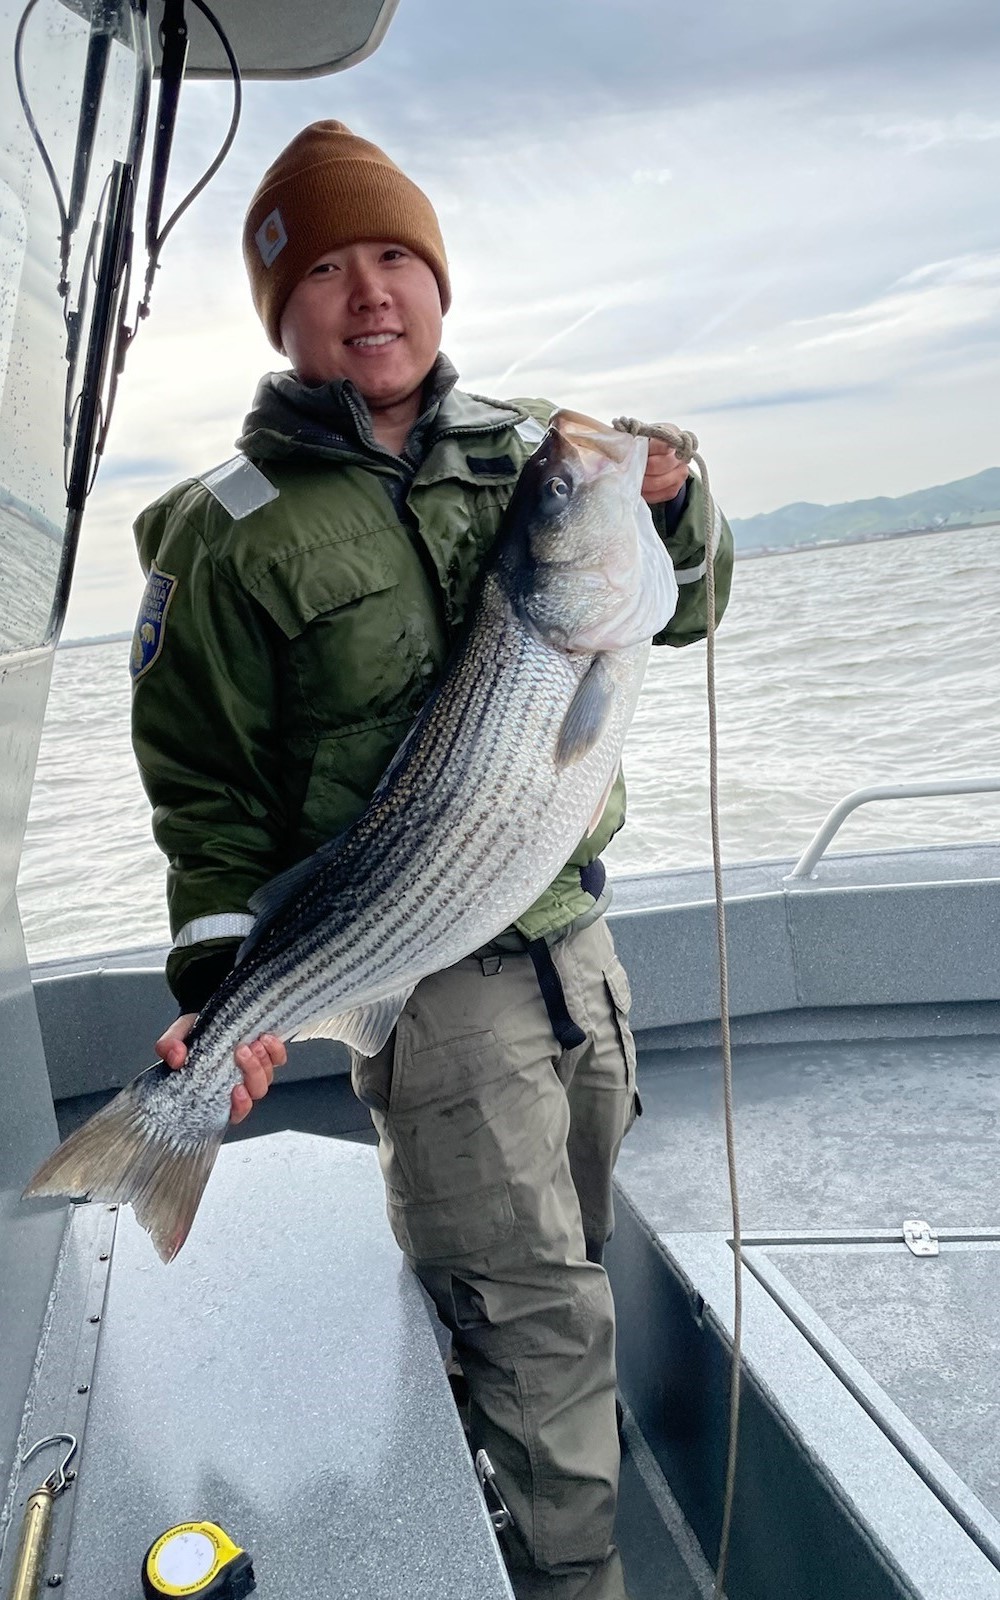 Smiling man on a boat holding up a large striped bass